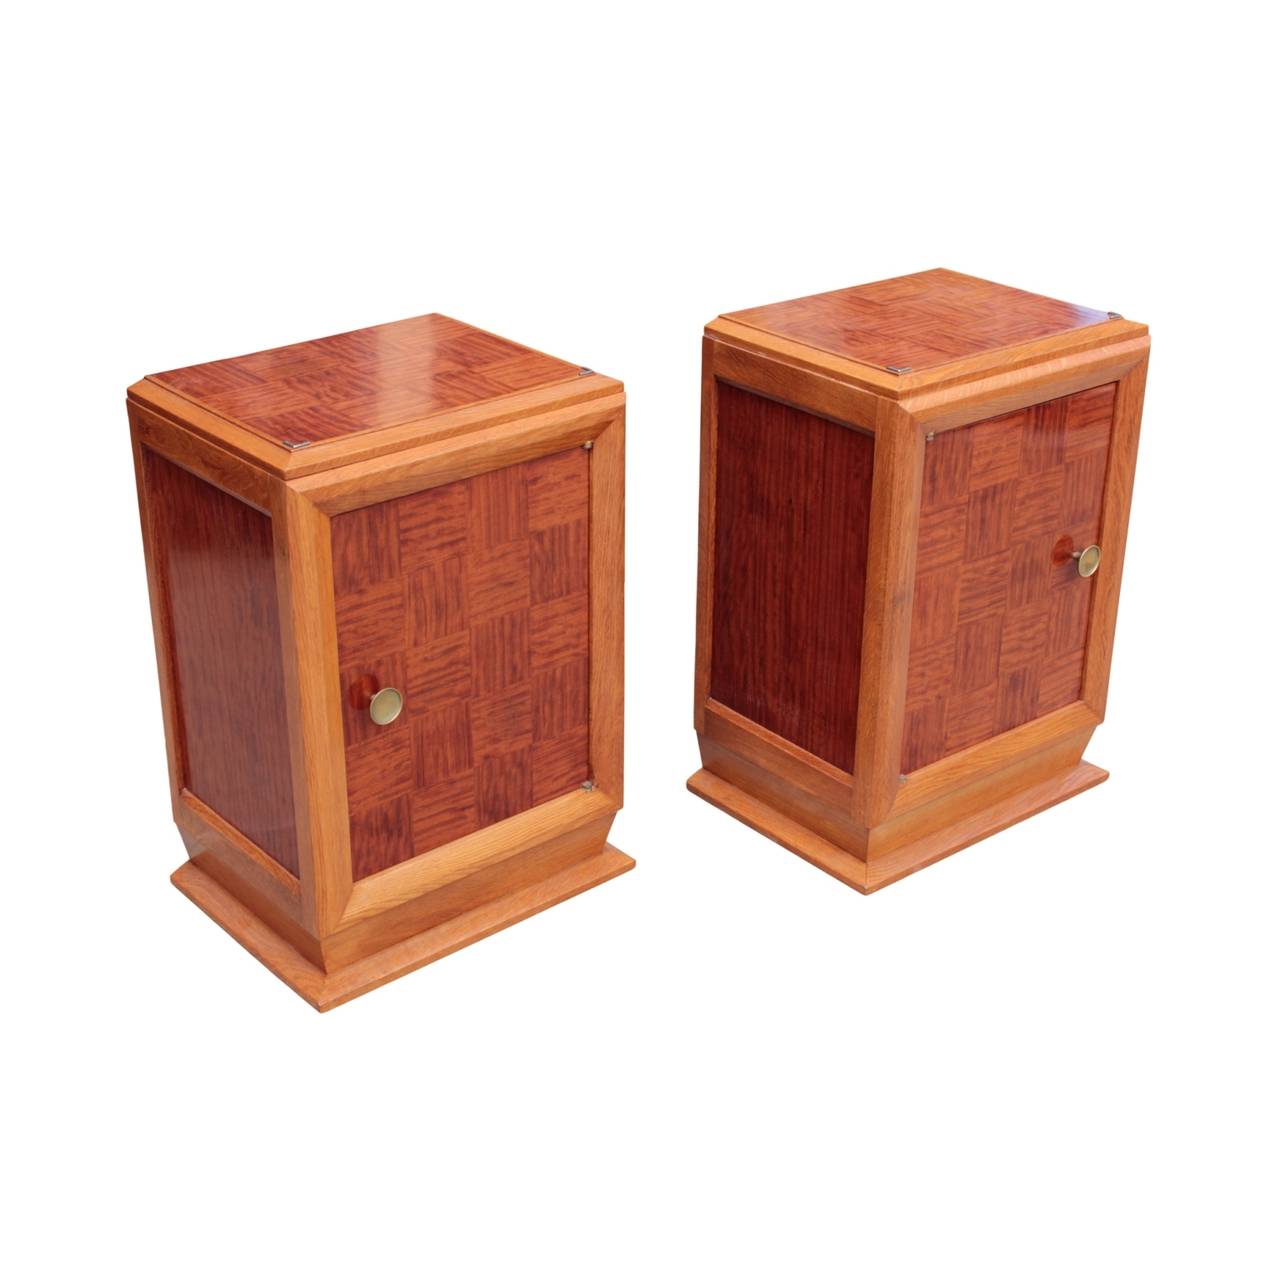 Pair of French Art Deco period nightstands of excellent quality, most likely designed by Louis Majorelle. Each with frame and platform base in oak; top, sides and door parquet veneered with African ribbon mahogany. Door fitted with original round